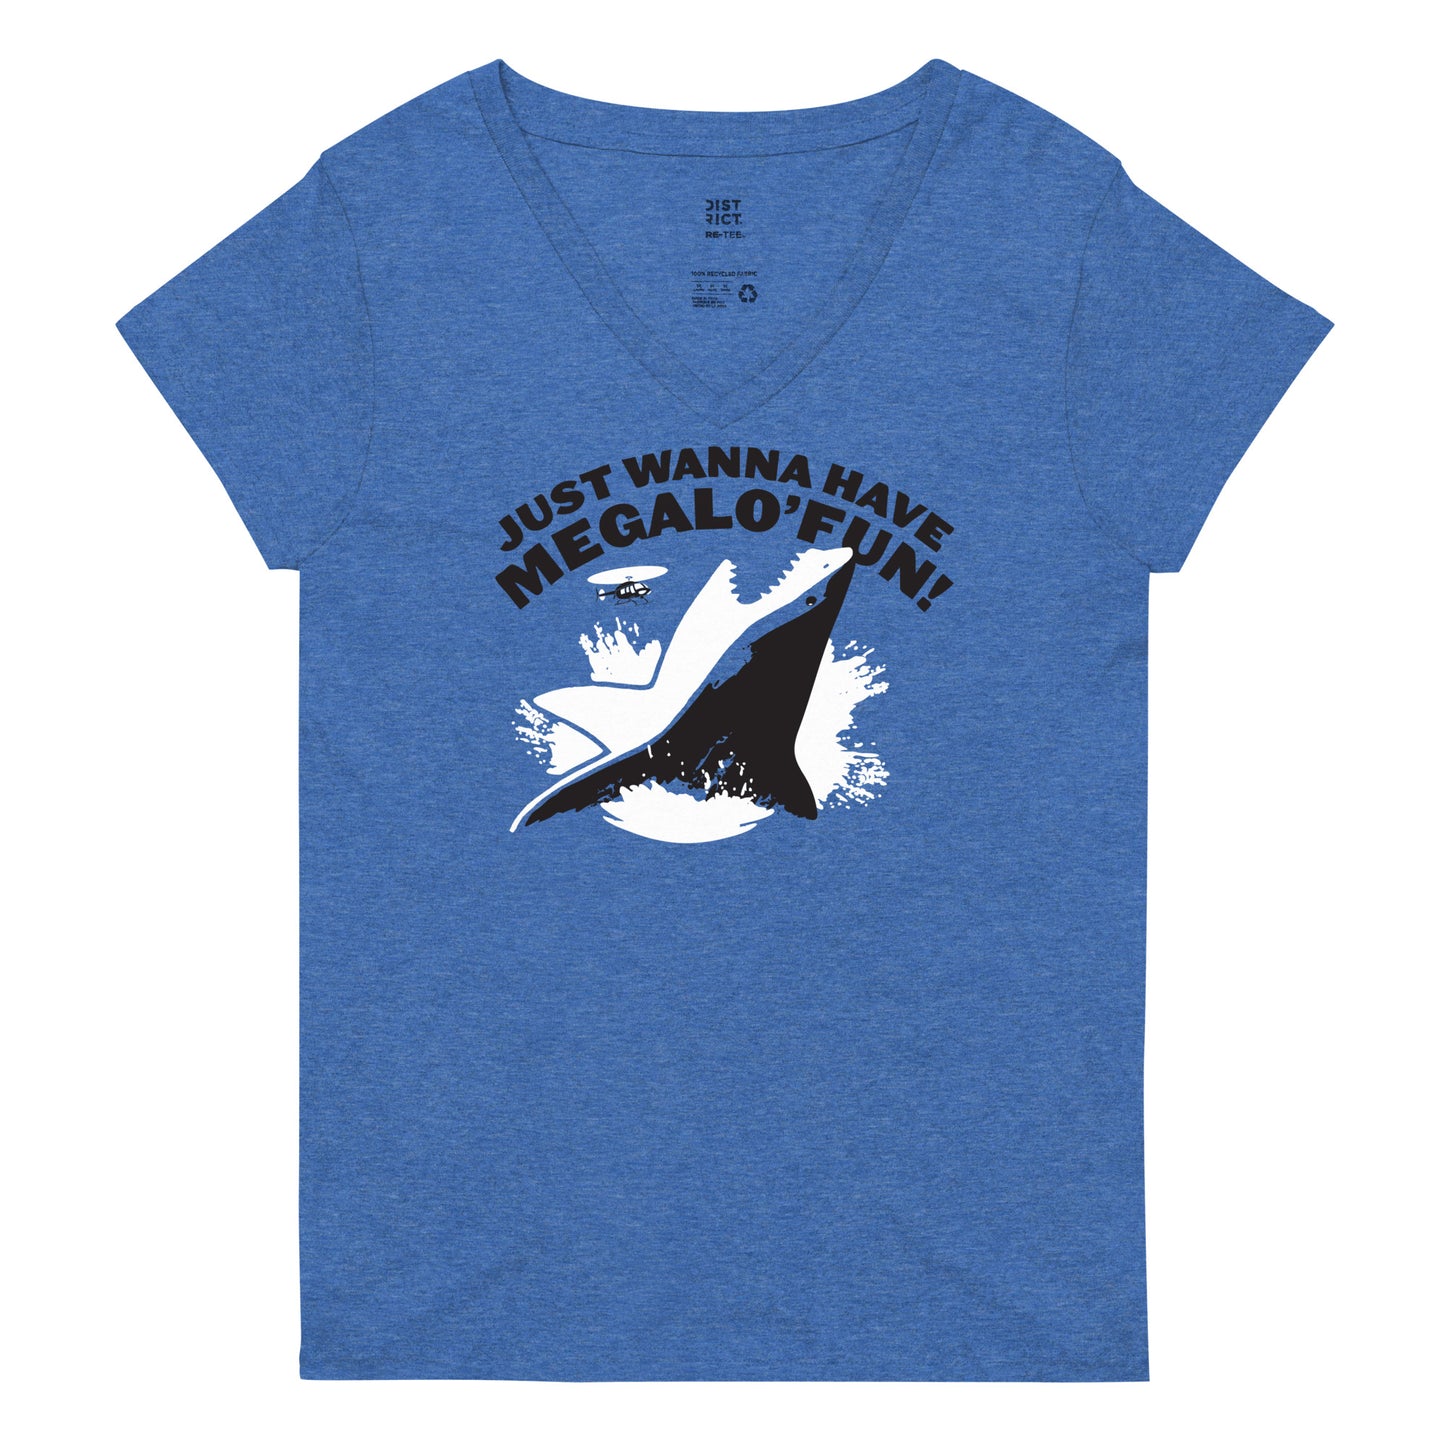 Just Wanna Have Megalo' Fun! Women's V-Neck Tee